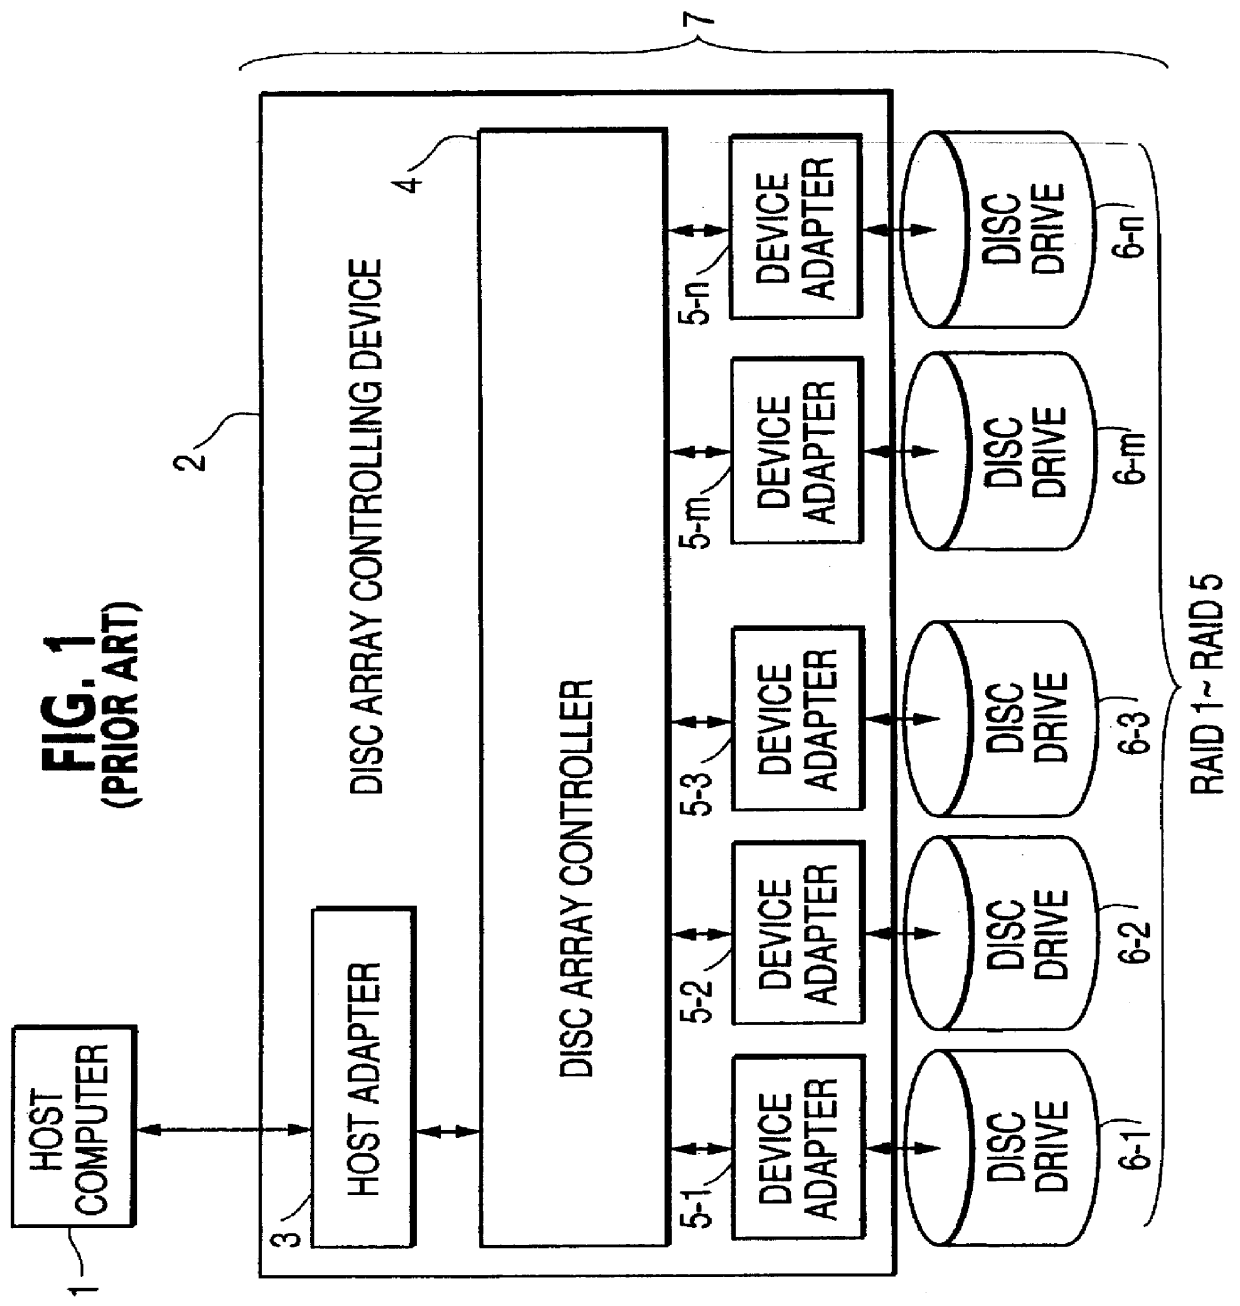 Disc array apparatus checking and restructuring data read from attached disc drives